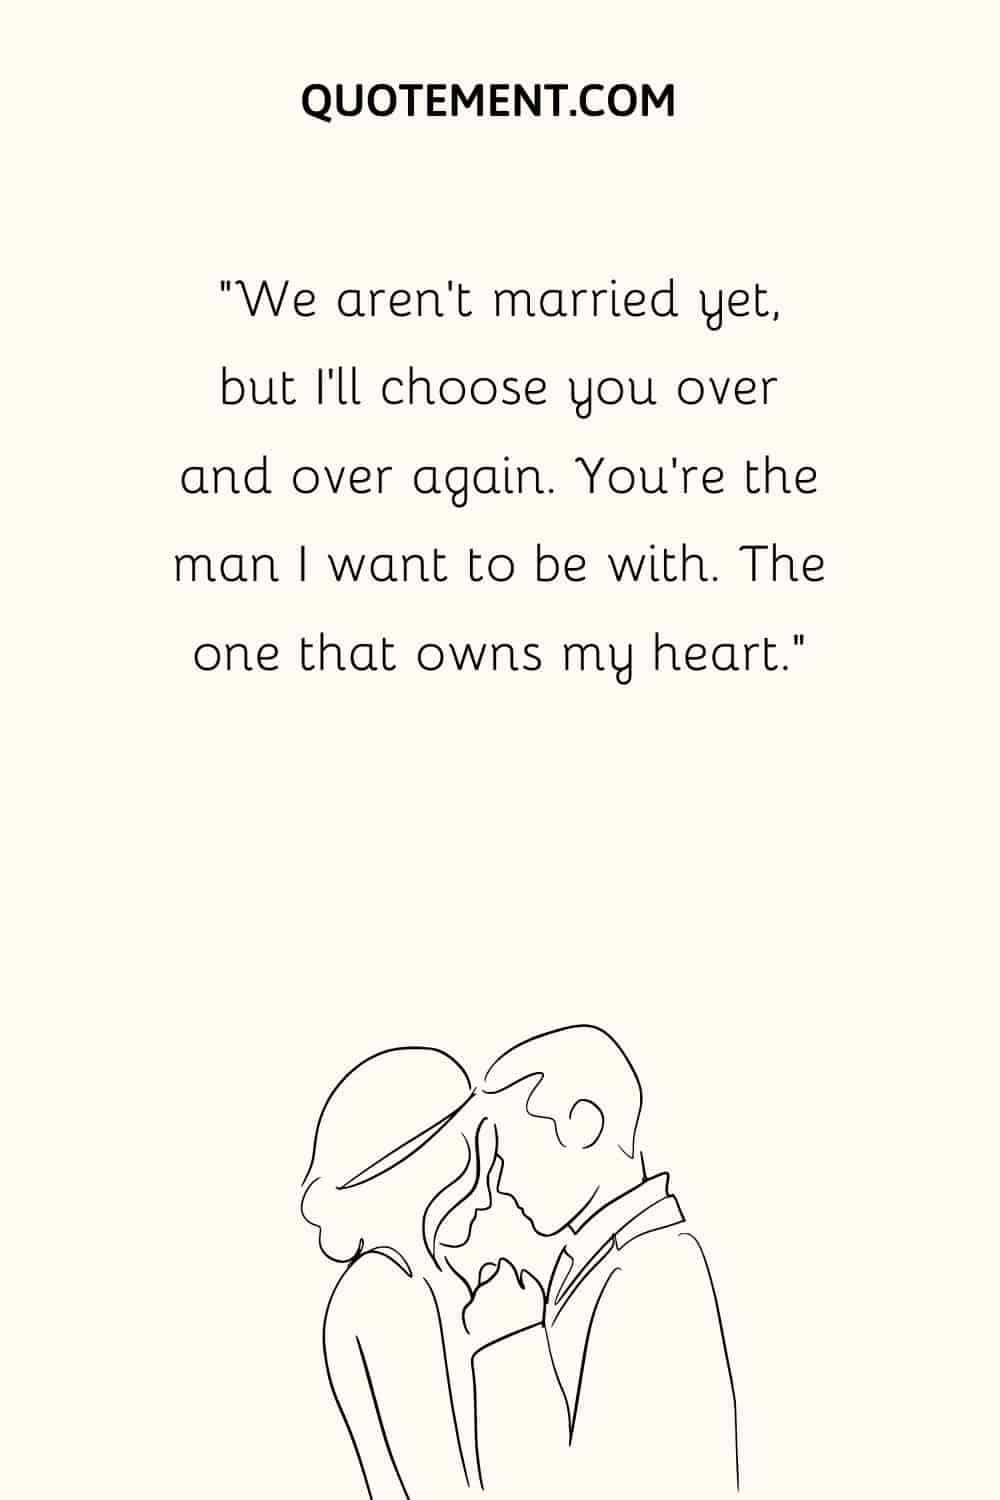 “We aren’t married yet, but I’ll choose you over and over again. You’re the man I want to be with. The one that owns my heart.”